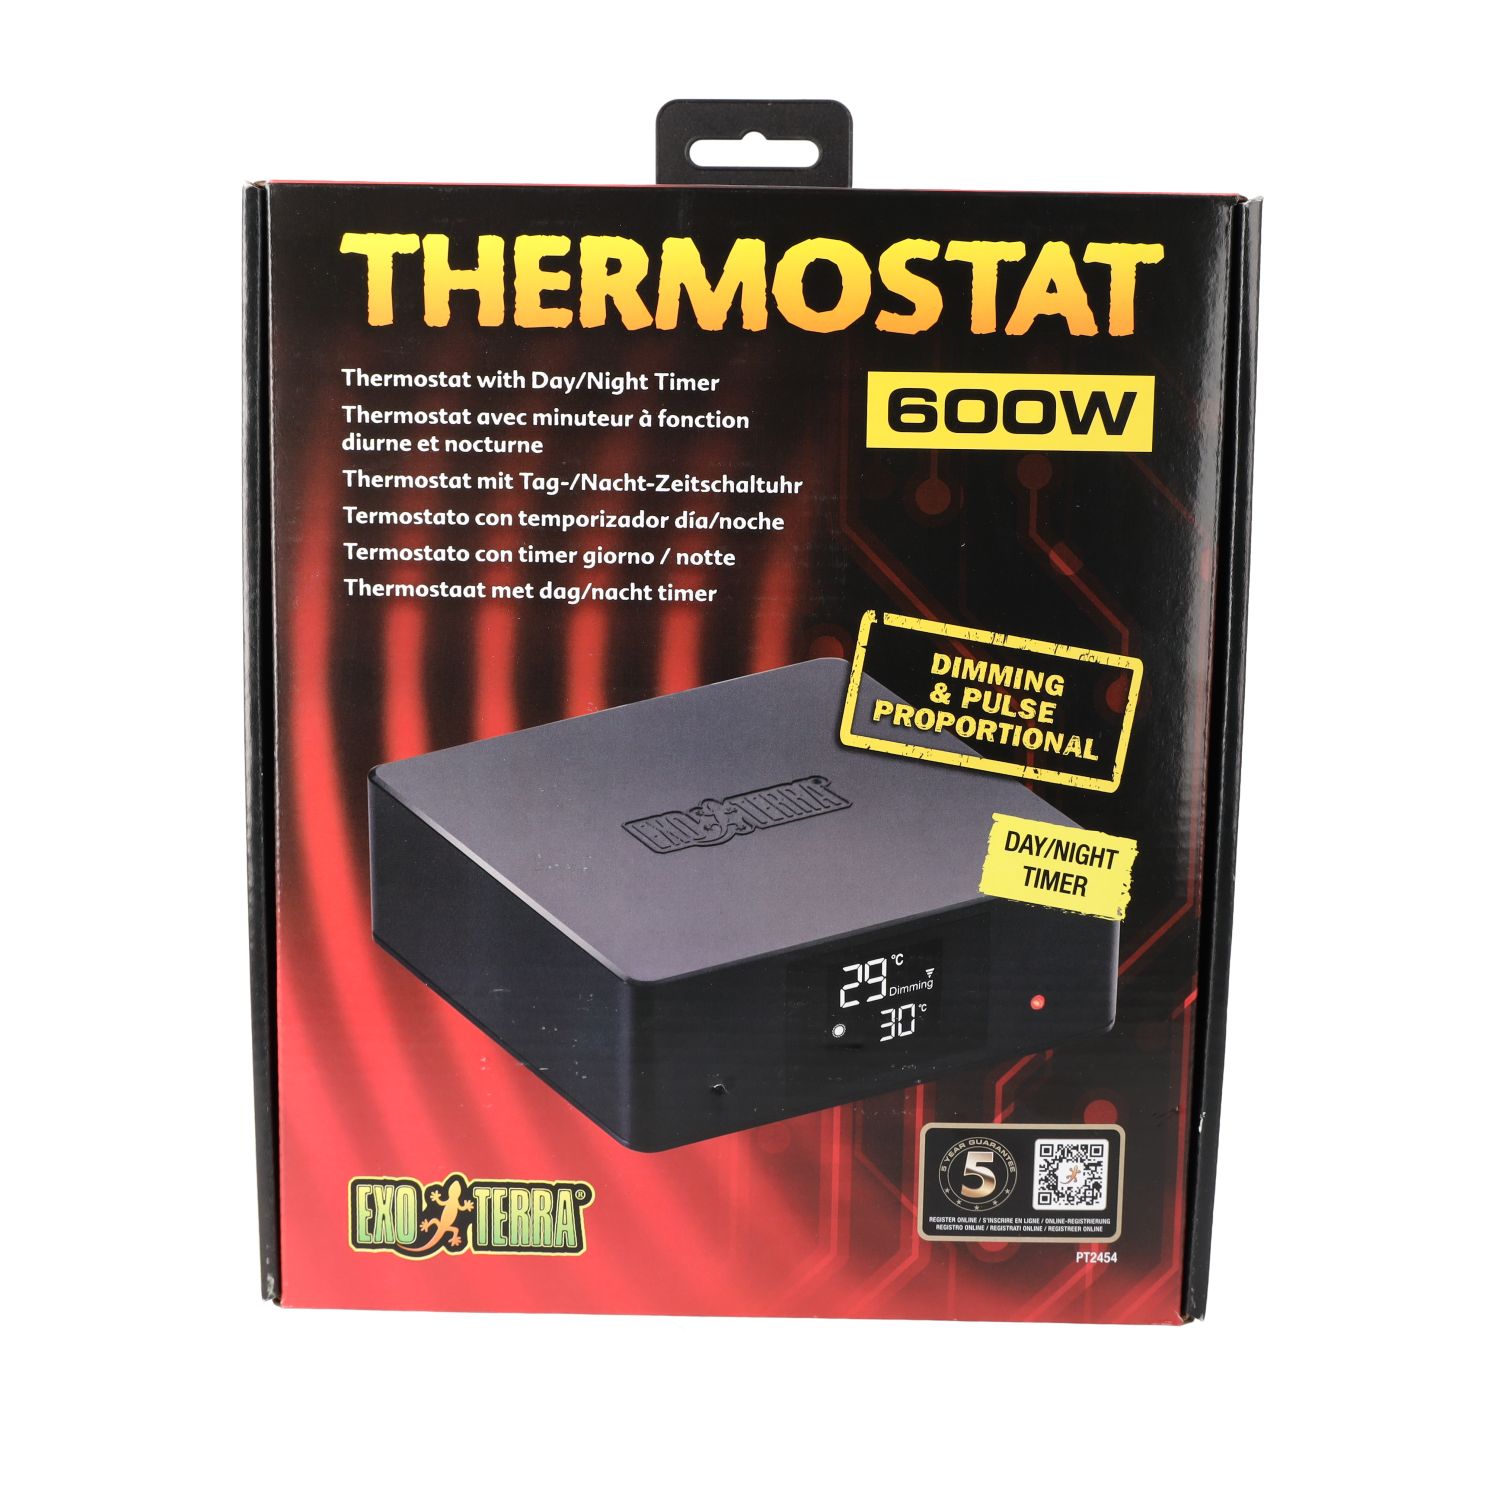 ET Thermostat 600w with Day/Night Timer, PT2454